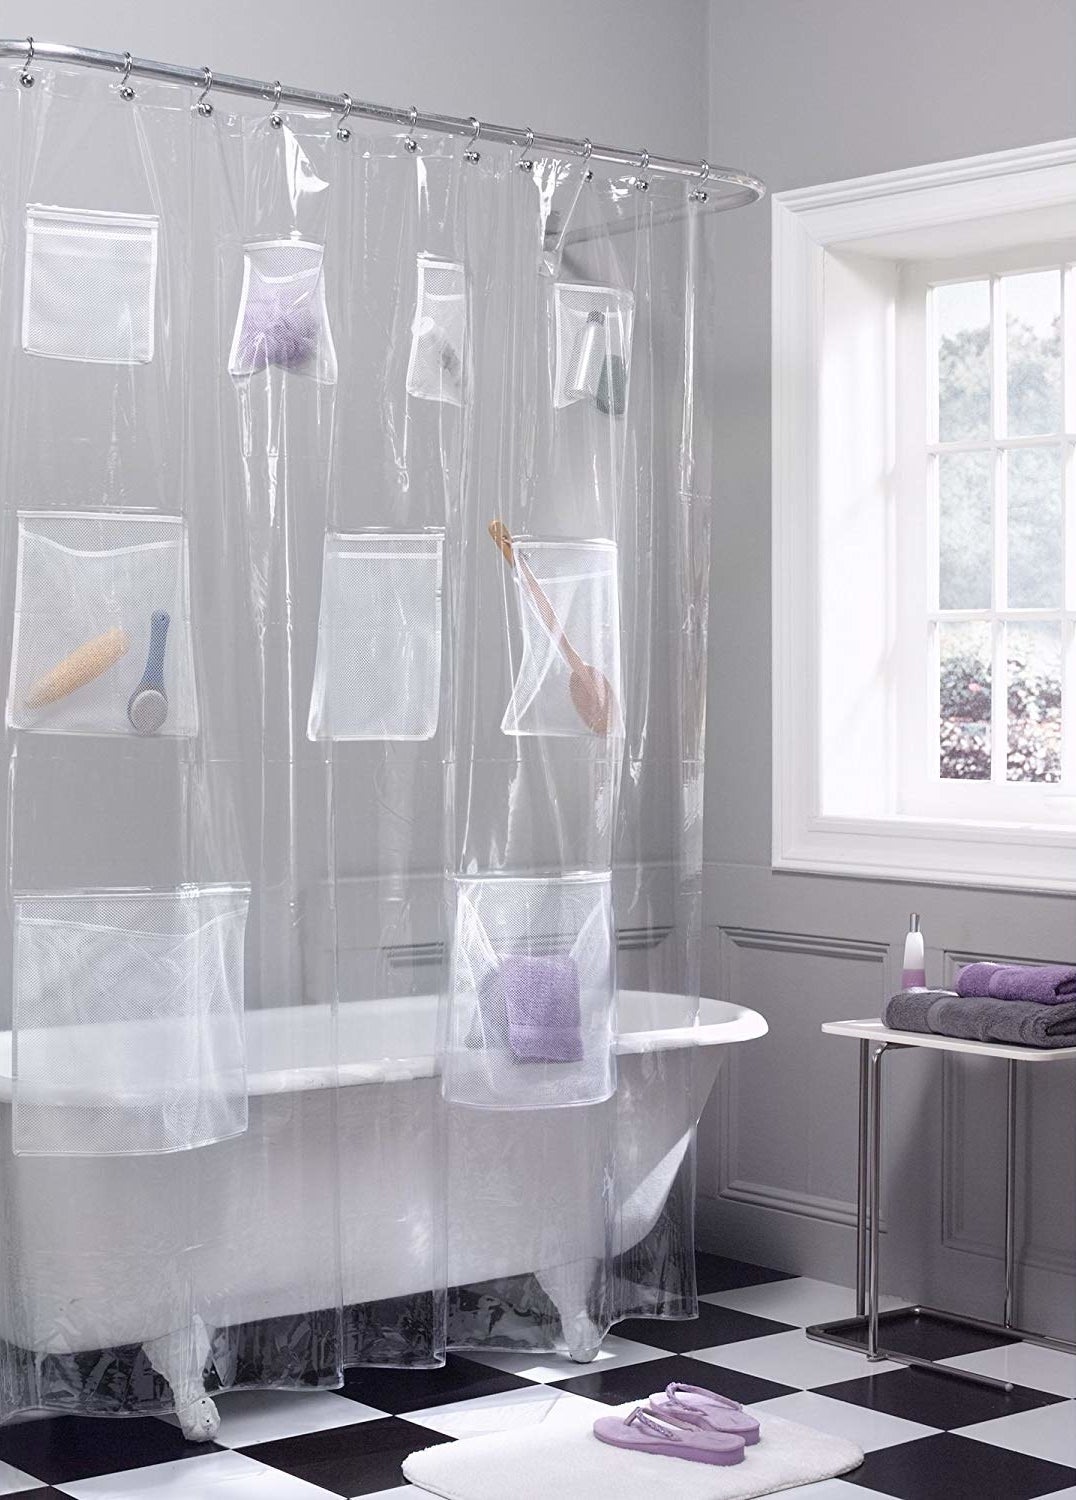 clear shower curtain with mesh pockets filled with towel, shampoo, brush, and other items